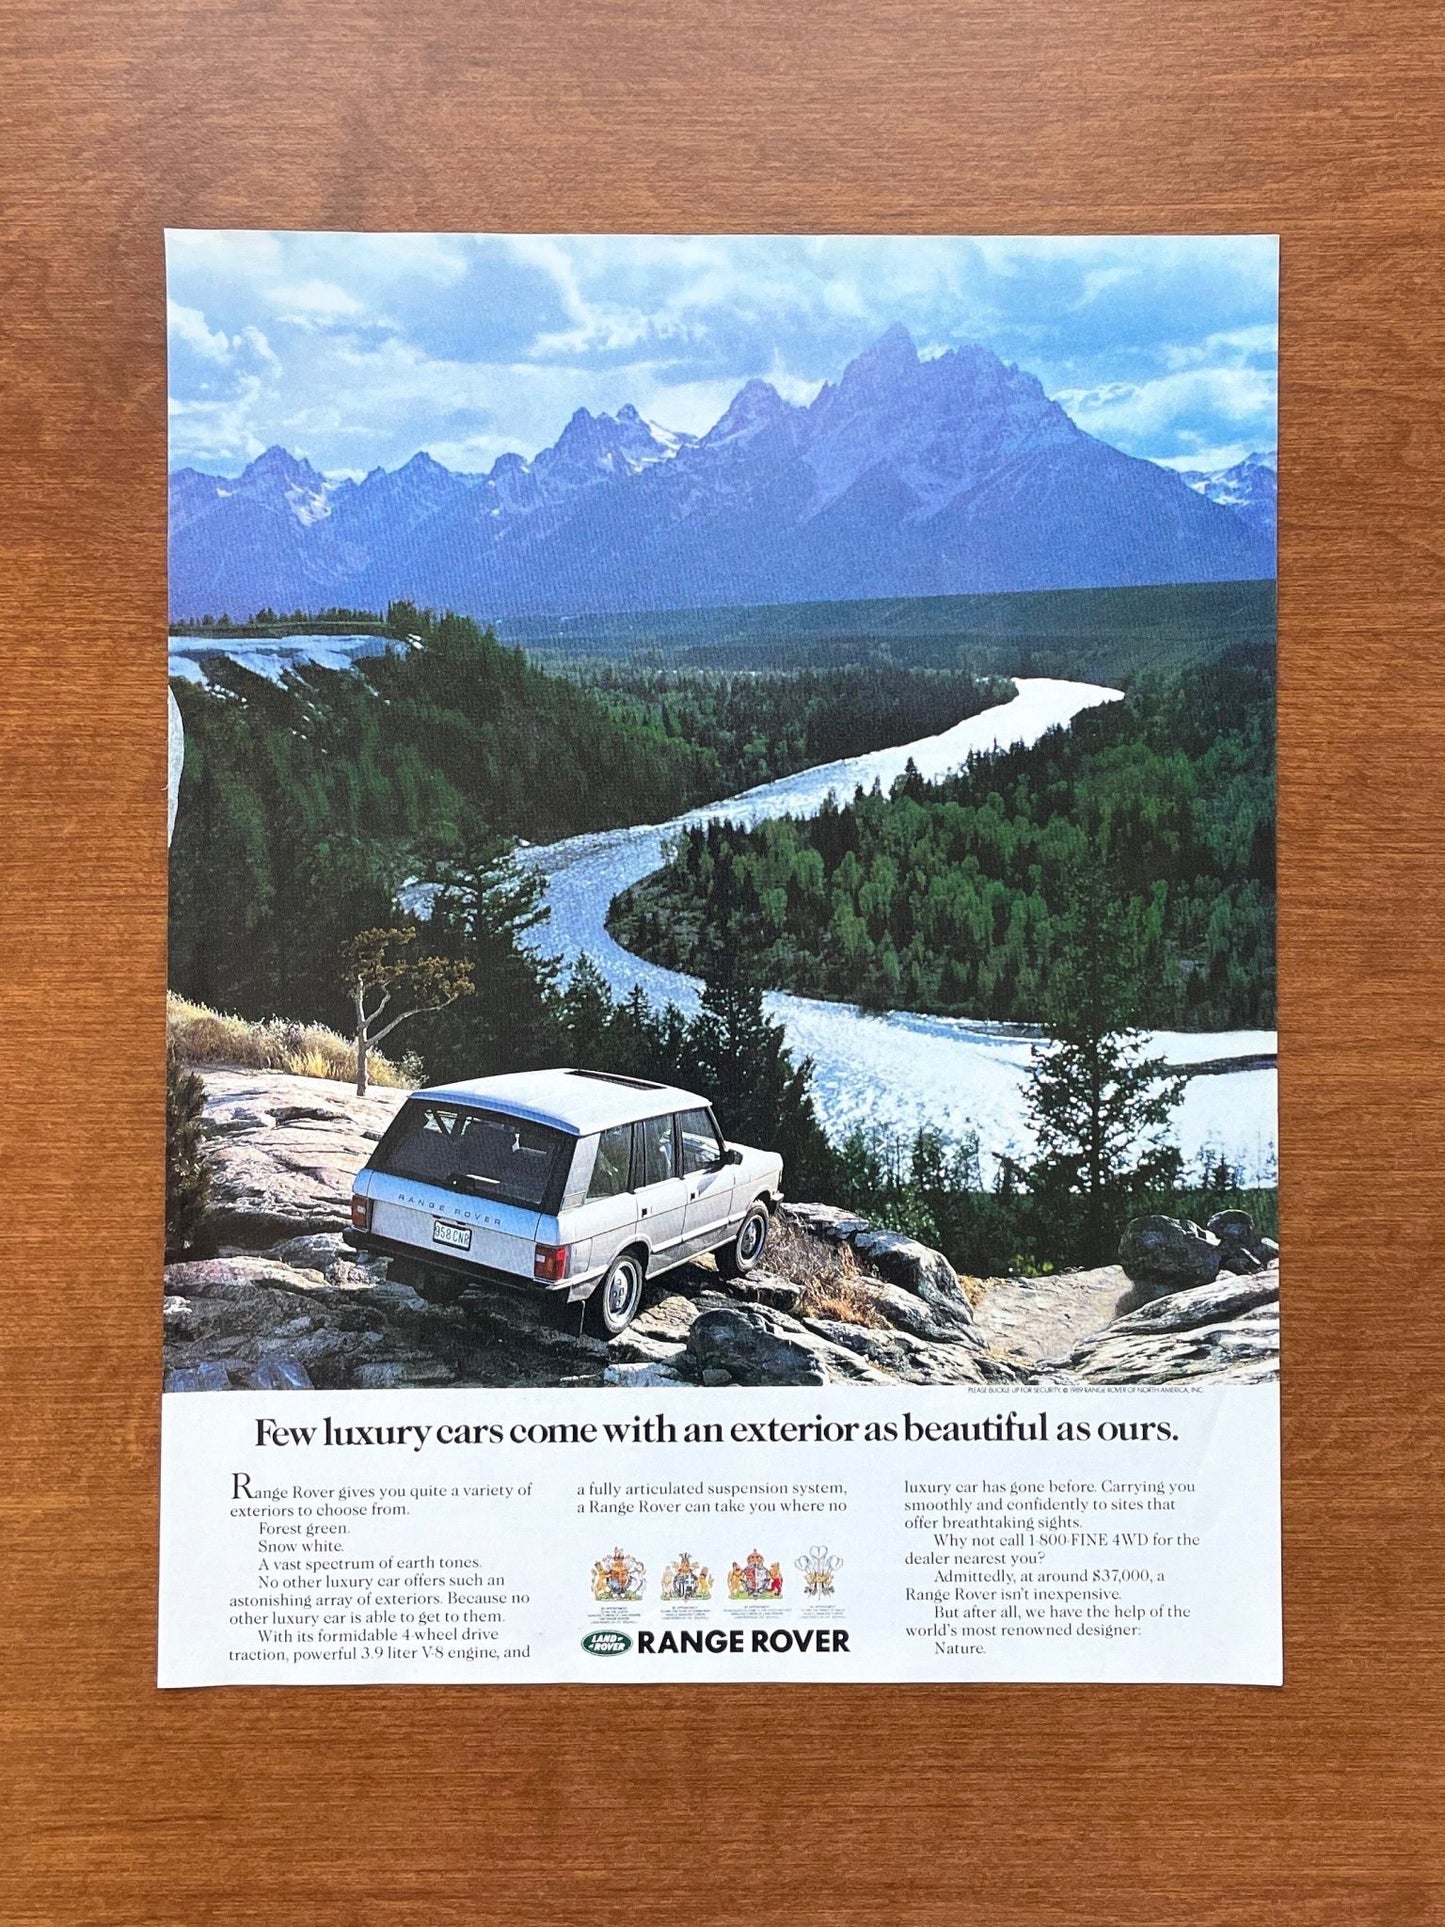 1989 Range Rover "exterior as beautiful as ours." Advertisement